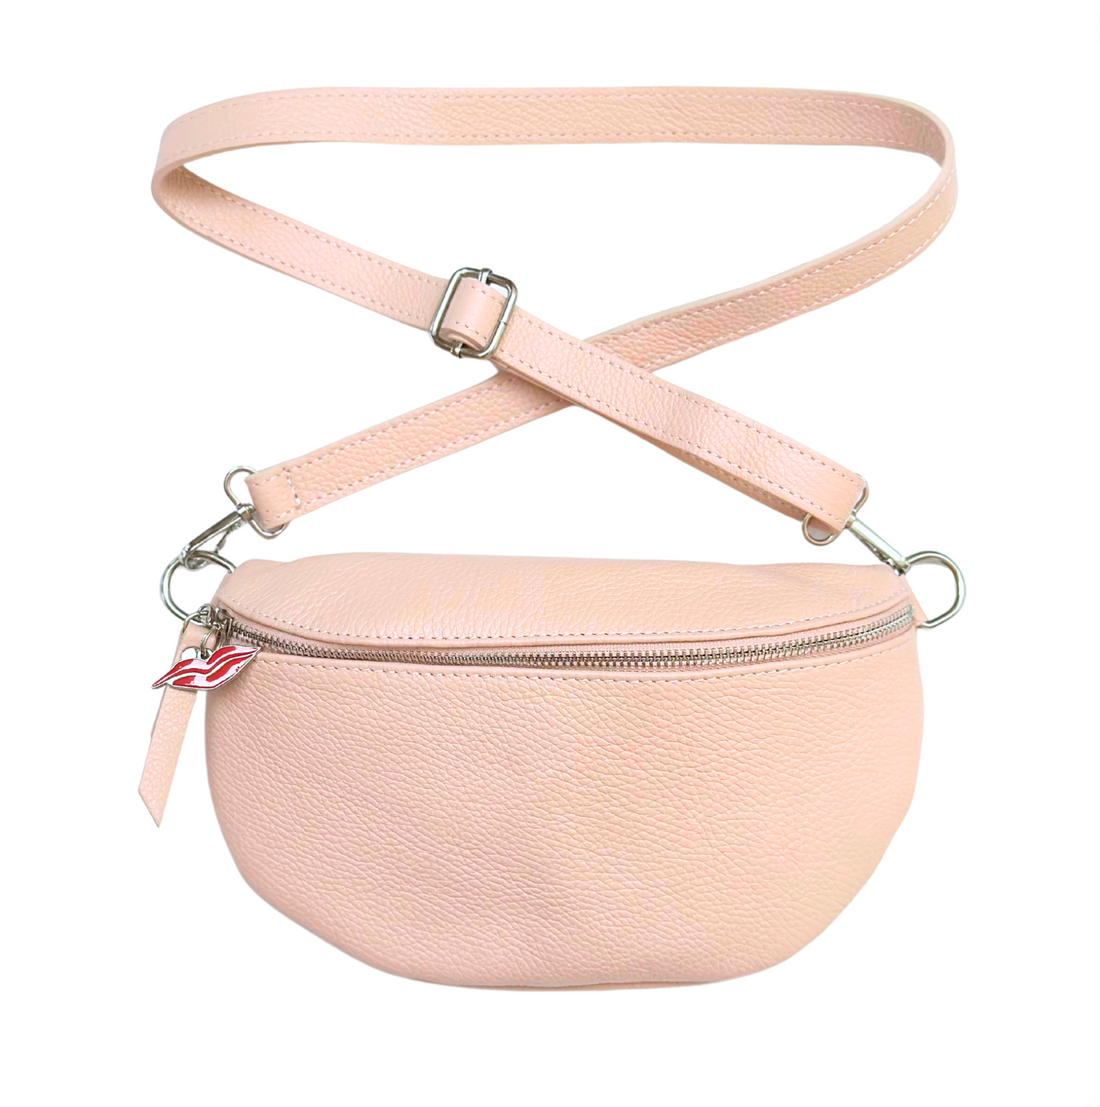 Monaco City Bag in Blush Pink - With Leather Strap